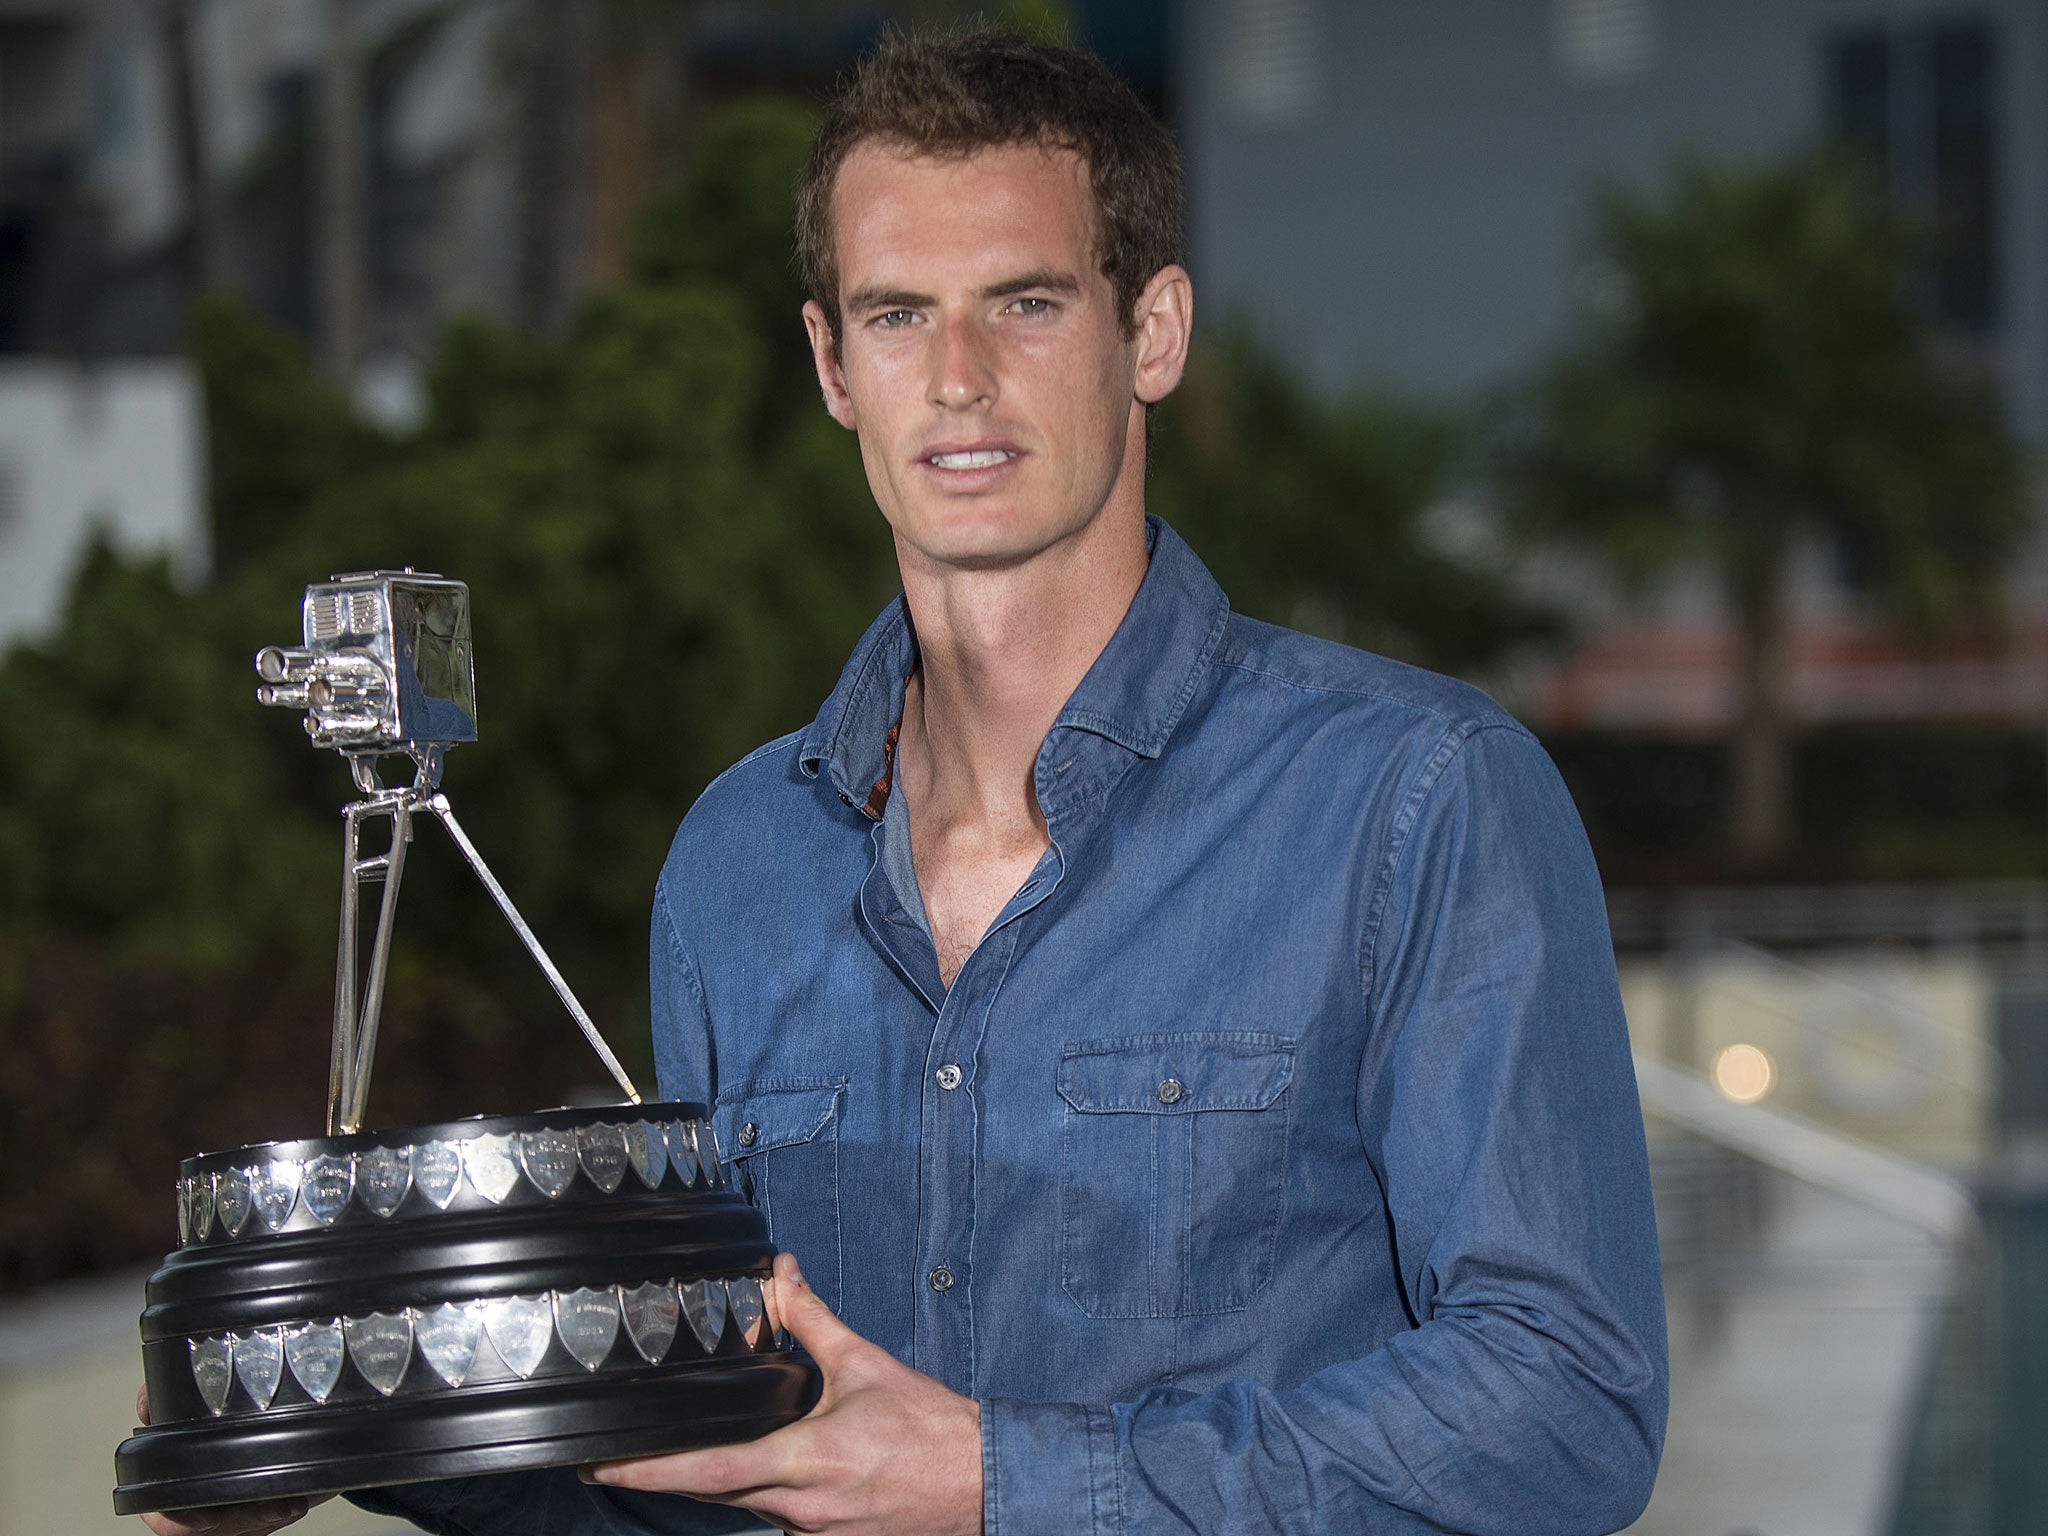 Wimbledon champion Andy Murray with his Sports Personality of the Year award